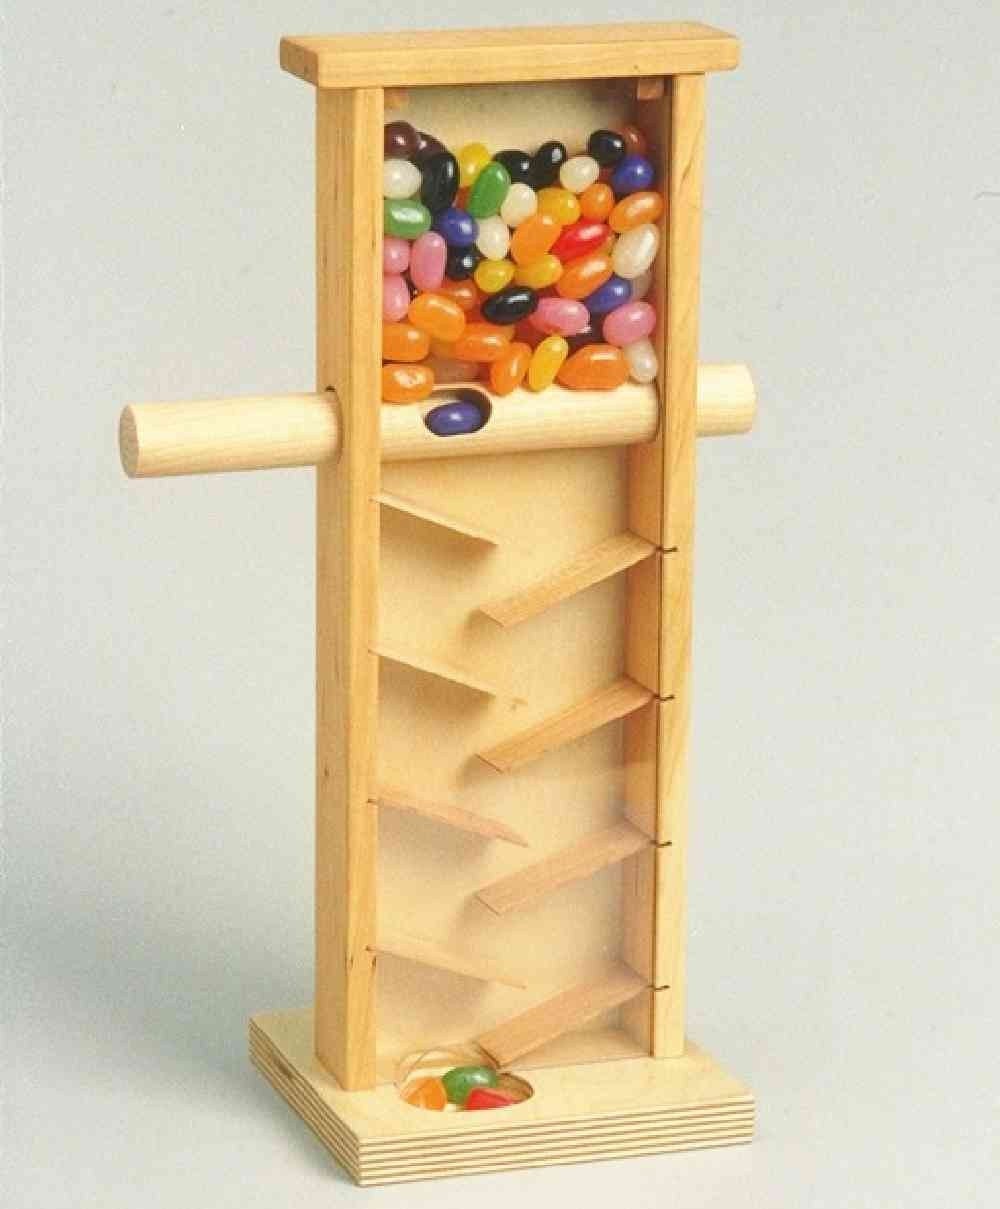 Handcrafted wooden JELLY BEAN MACHINE CANDY DISPENSER - Stylehive